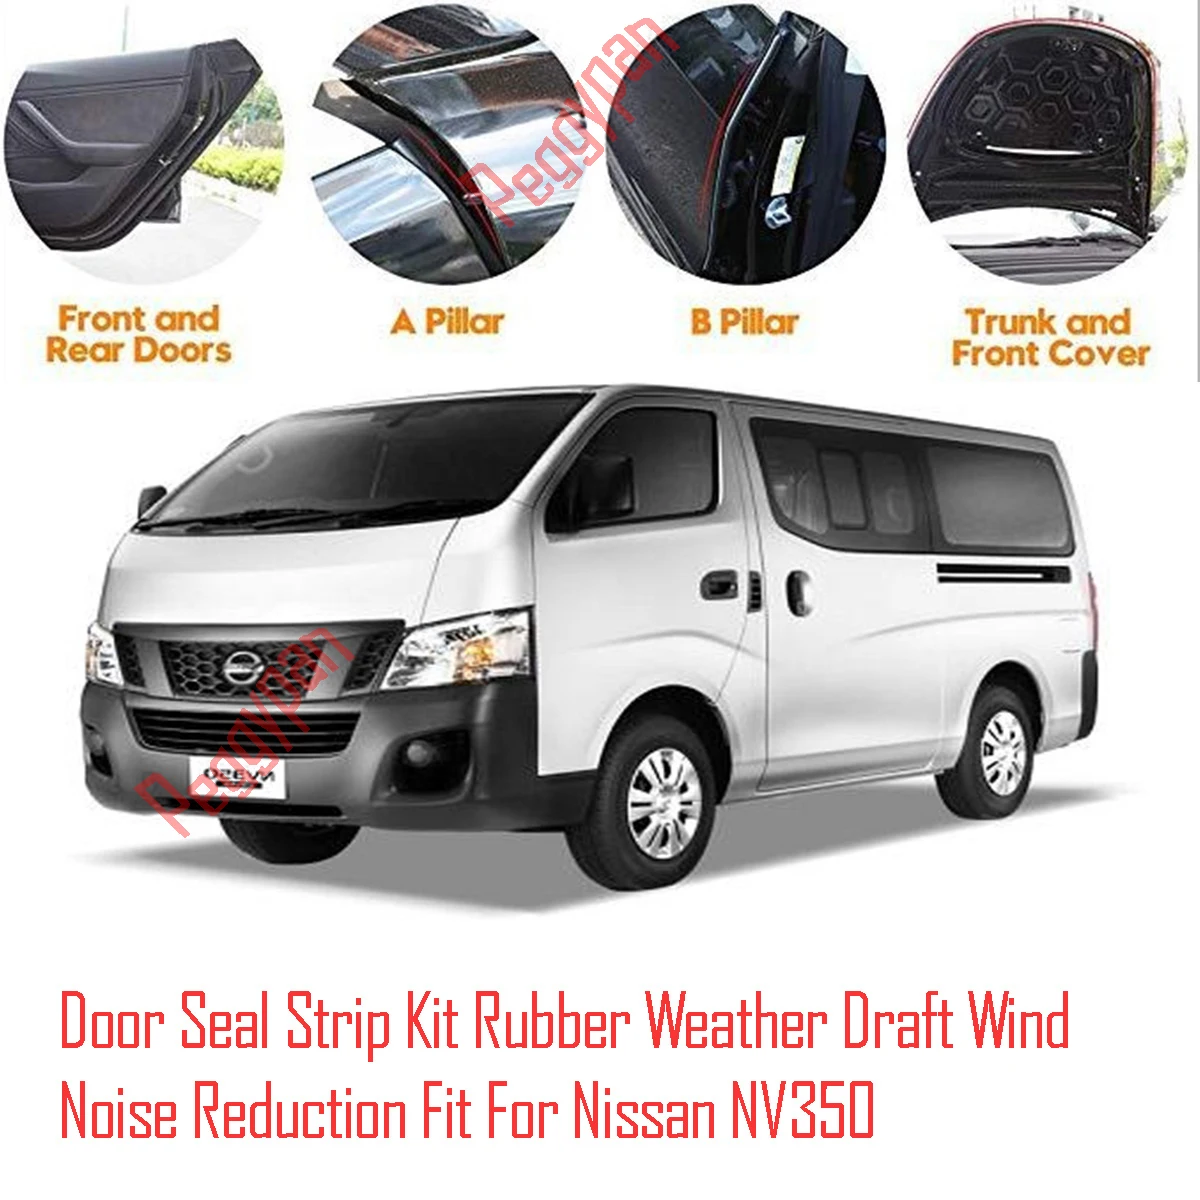 Door Seal Strip Kit Self Adhesive Window Engine Cover Soundproof Rubber Weather Draft Wind Noise Reduction Fit For Nissan NV350